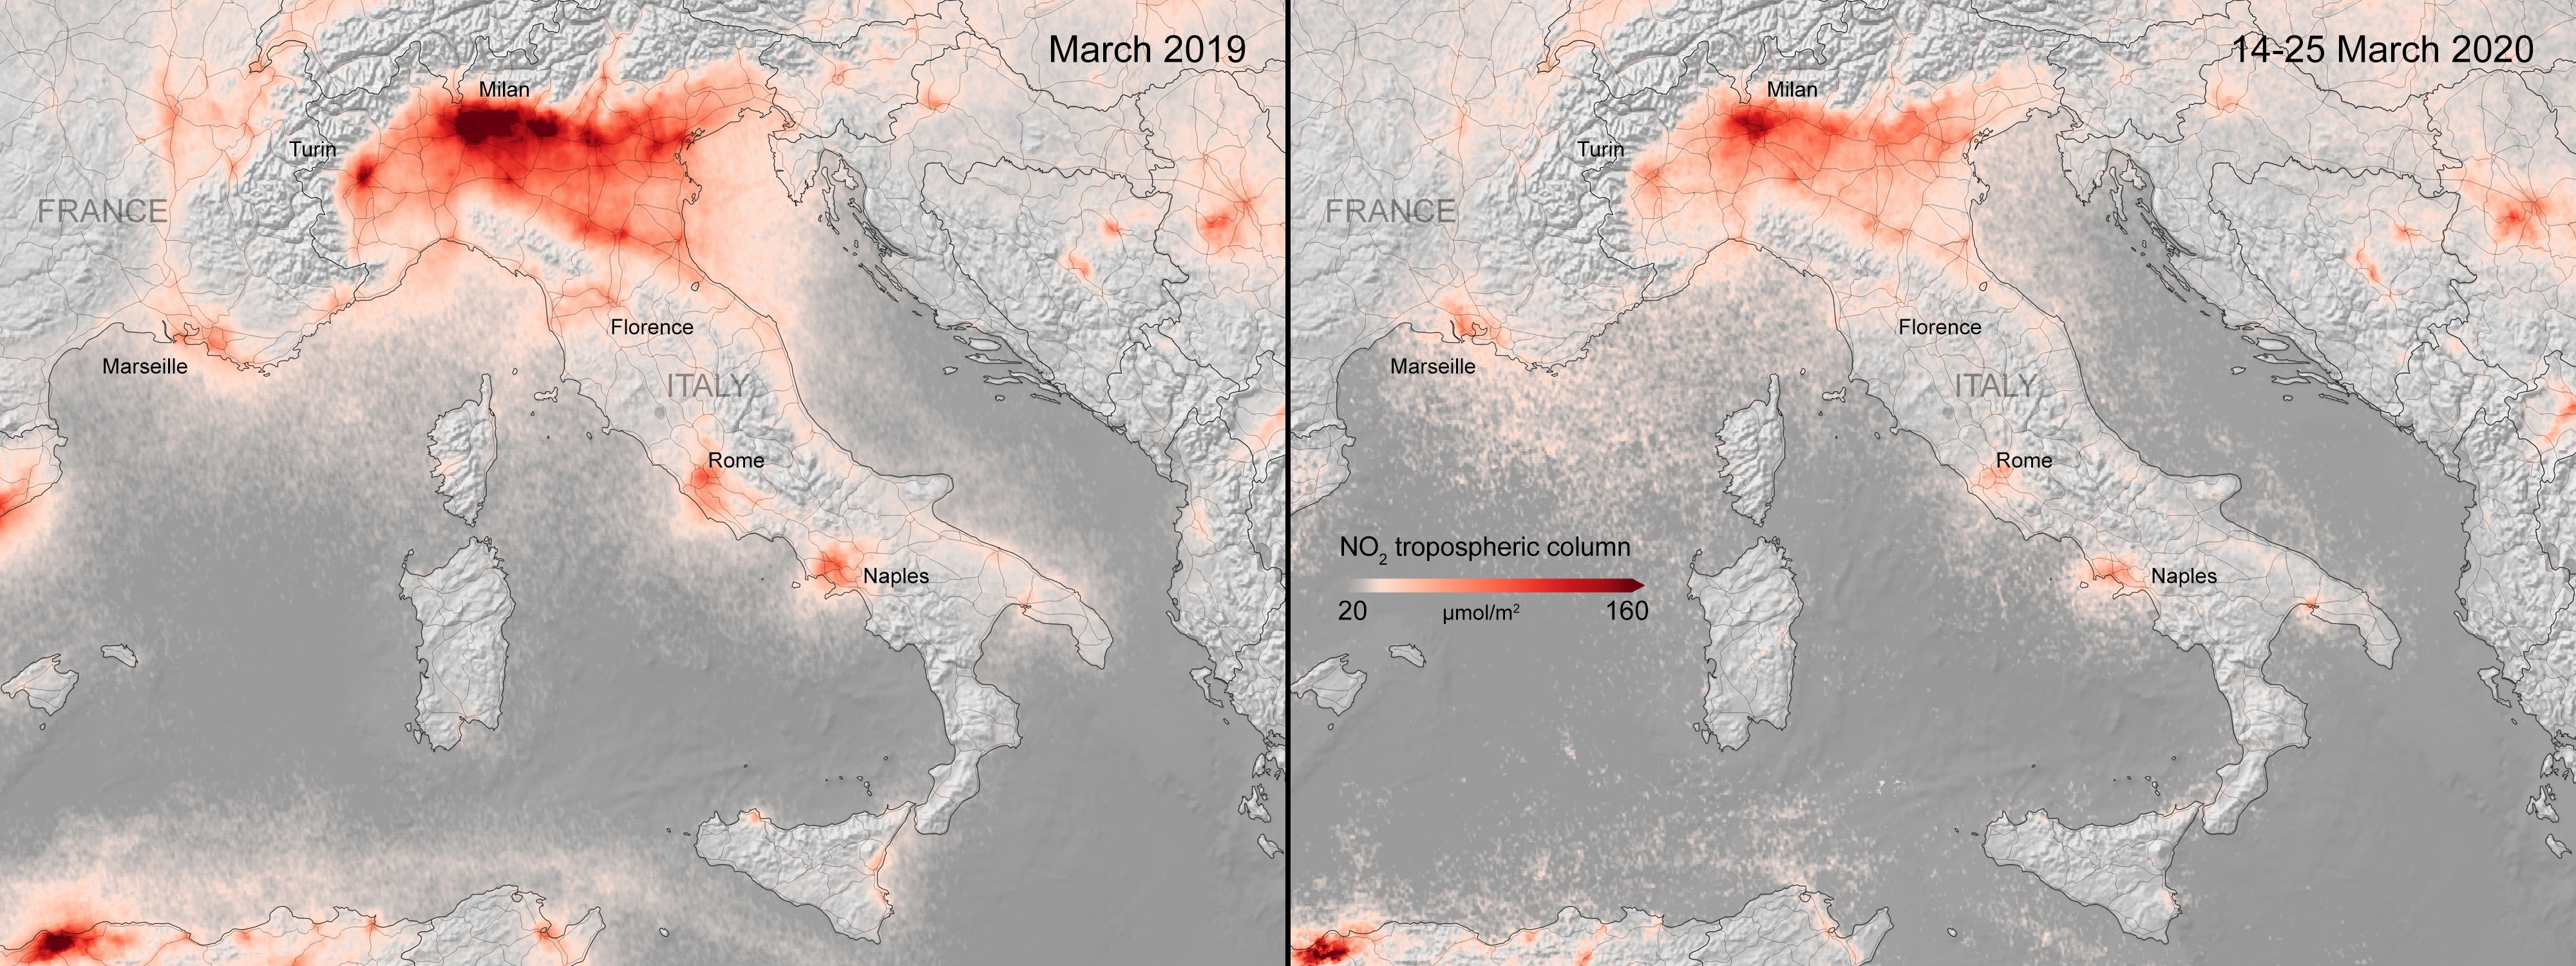 Data from the Copernicus Sentinel-5P satellite of the average nitrogen dioxide concentrations over Italy from March 2020 (R), compared to March 2019.